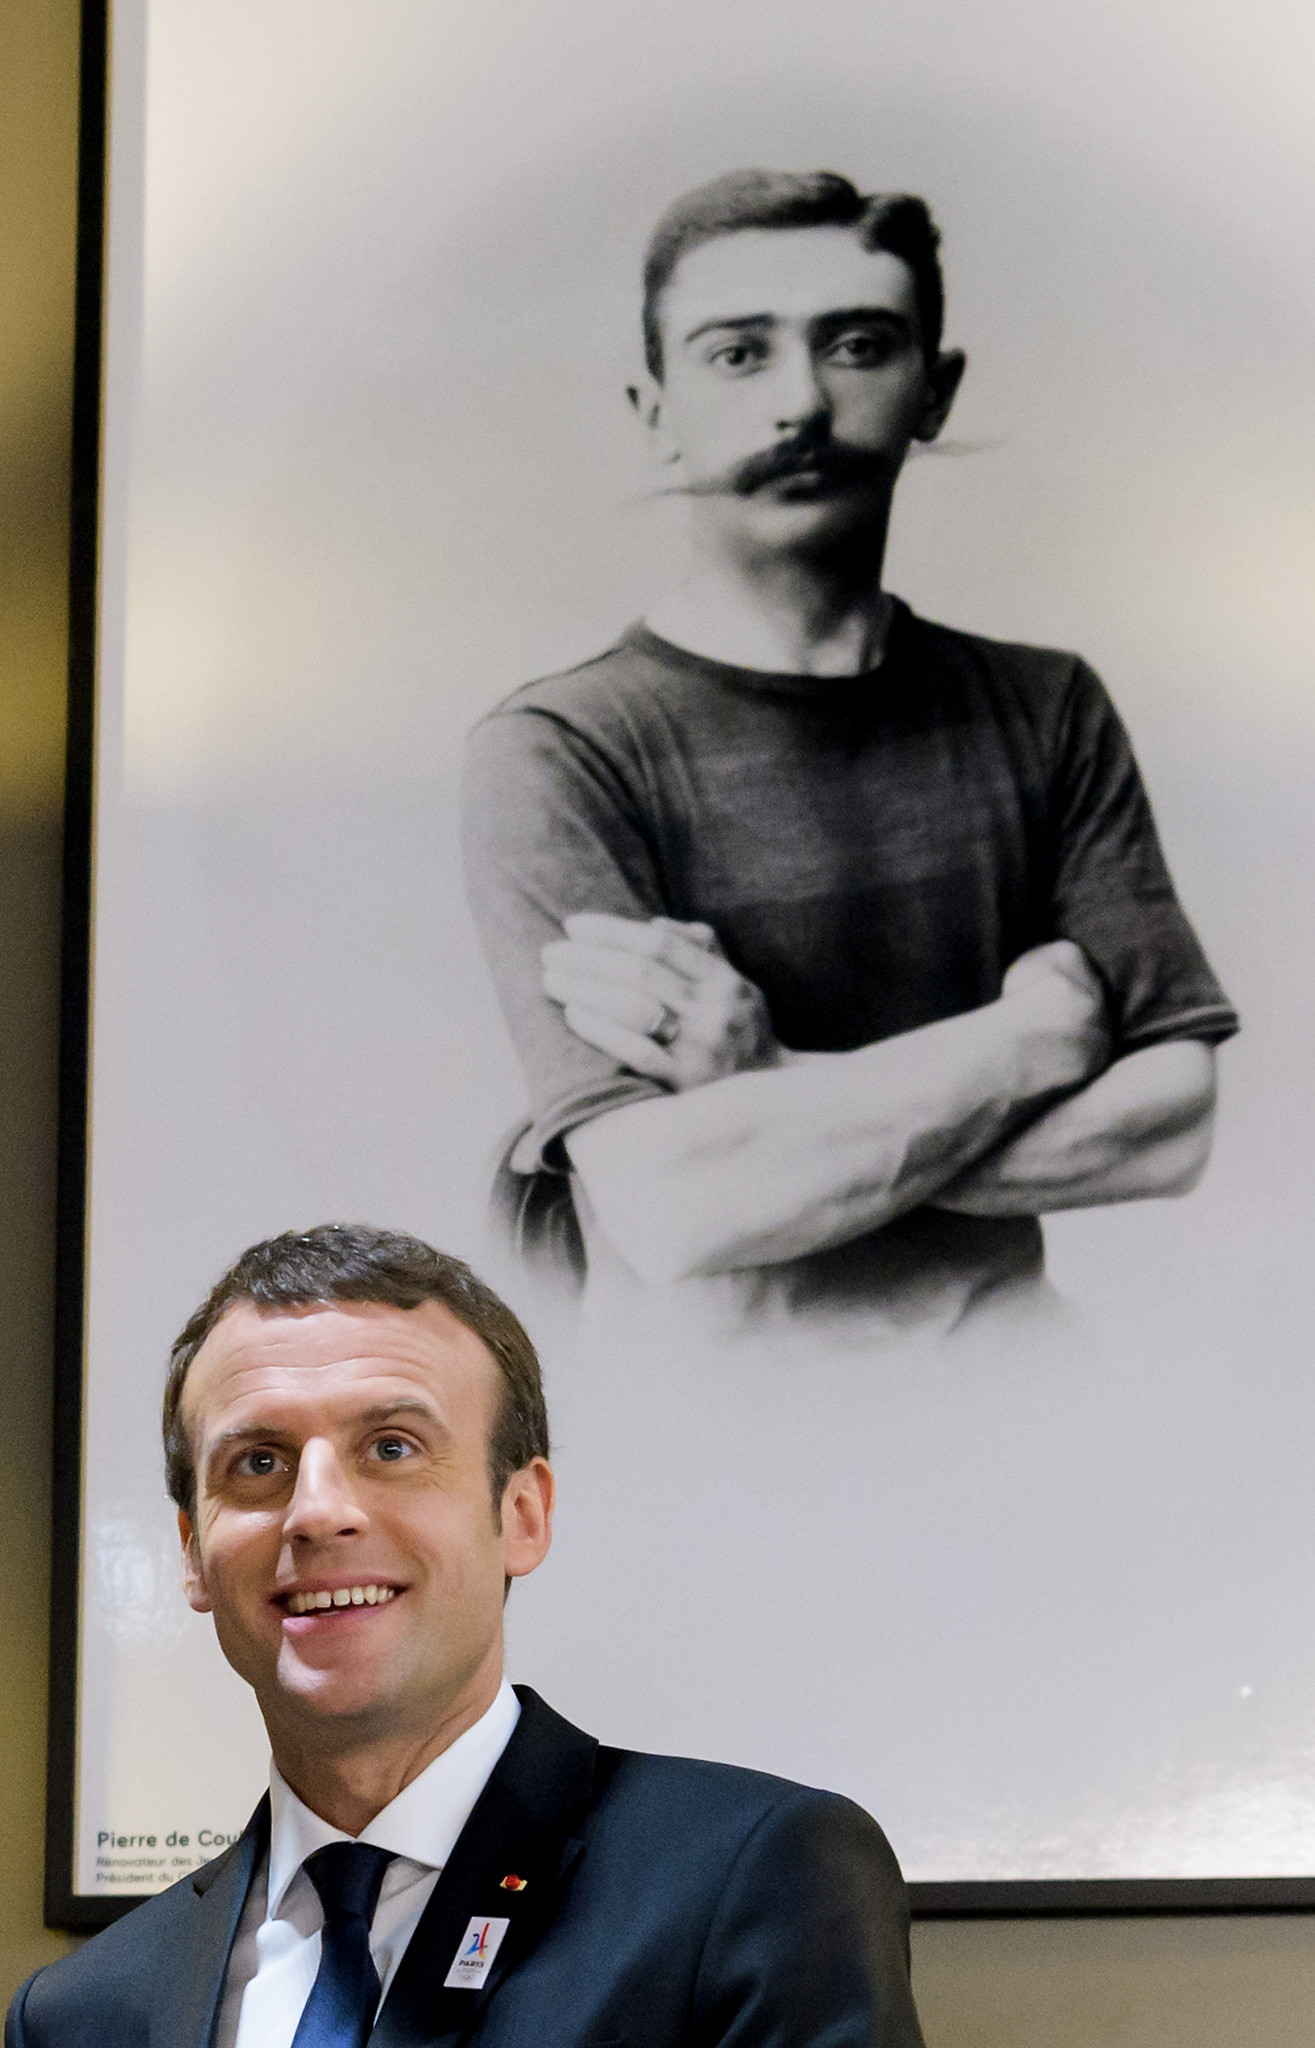 French President Emmanuel Macron pictured below a photograph of the youthful Baron Pierre de Coubertin during a 2017 visit to The Olympic Museum ©Getty Images